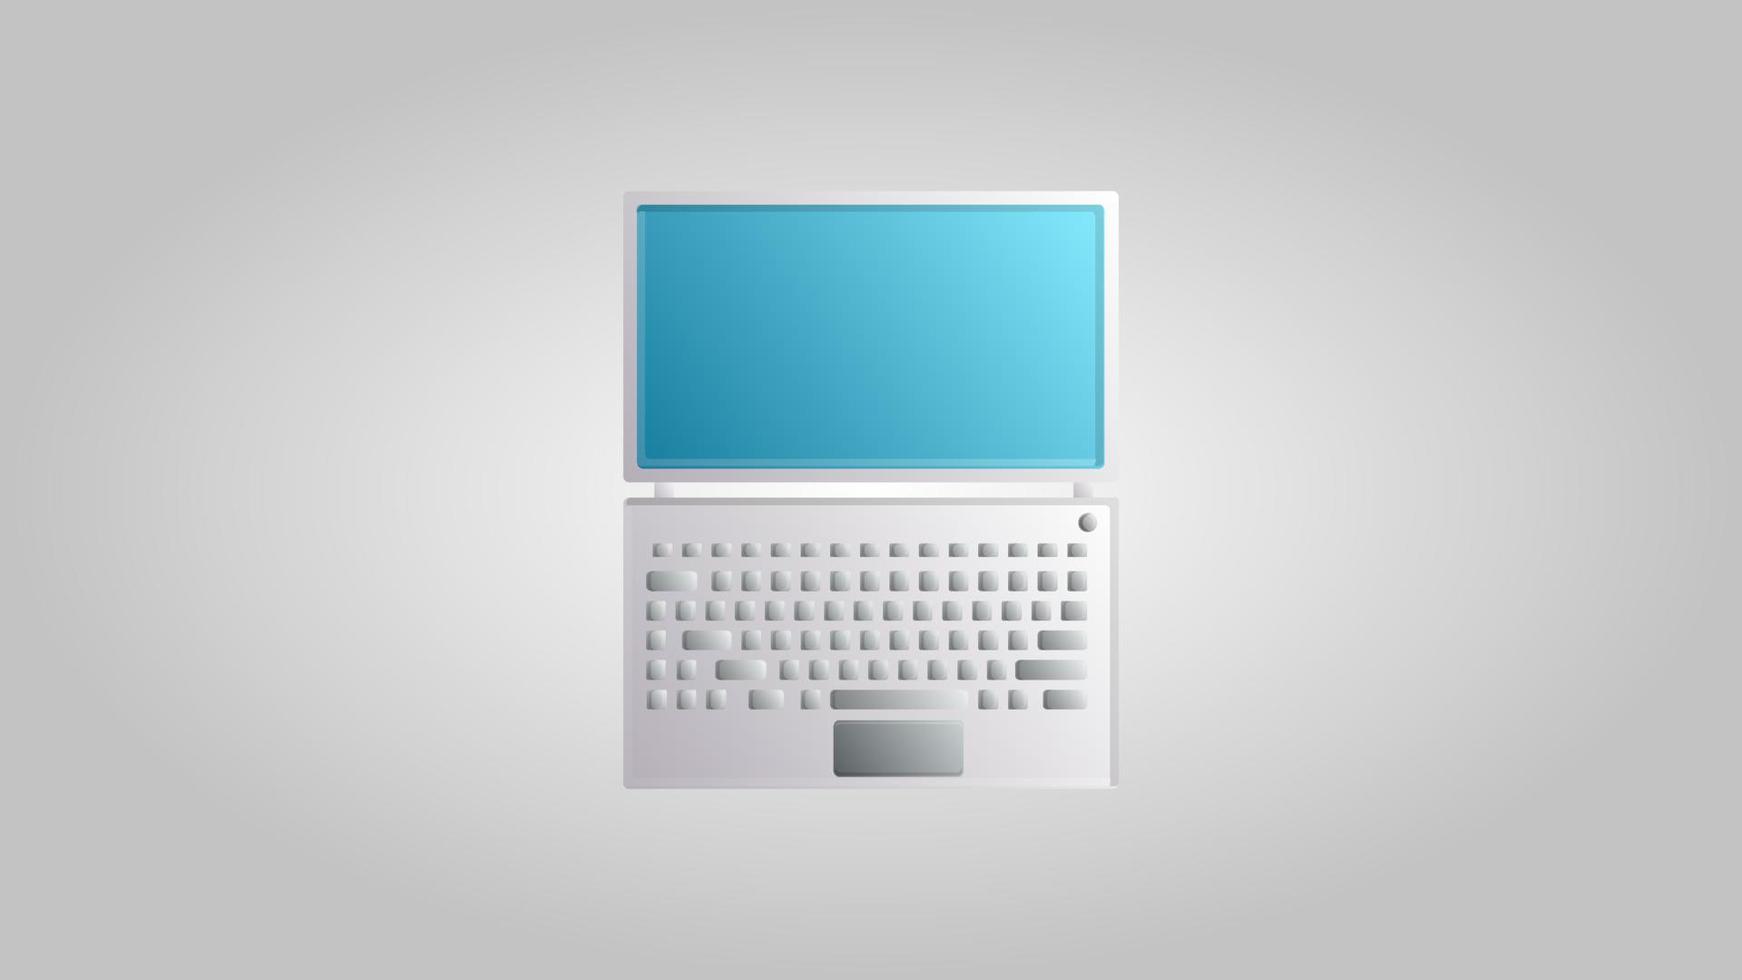 Modern digital new laptop computer for games, work and entertainment on a white background. Vector illustration